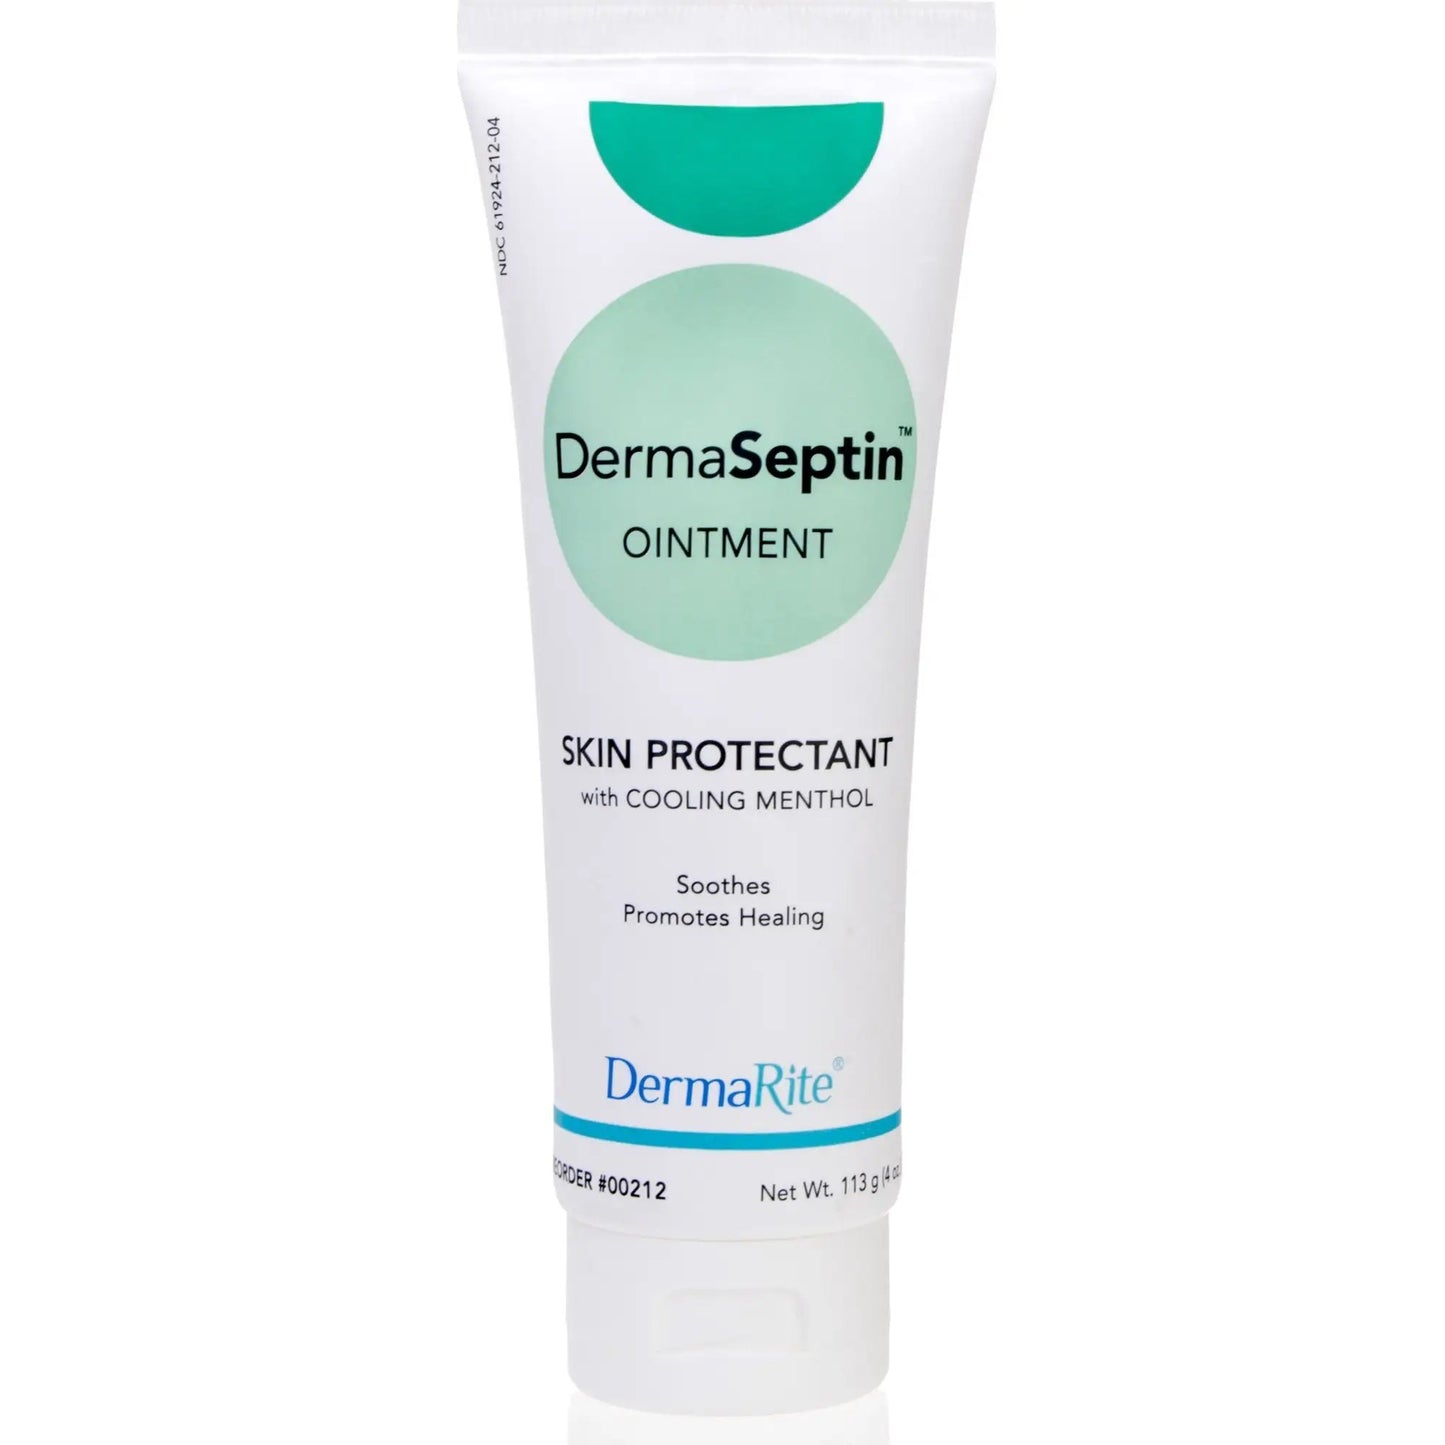 DermaSeptin Scented Skin Protectant Ointment, 4 oz. Tube - 00212